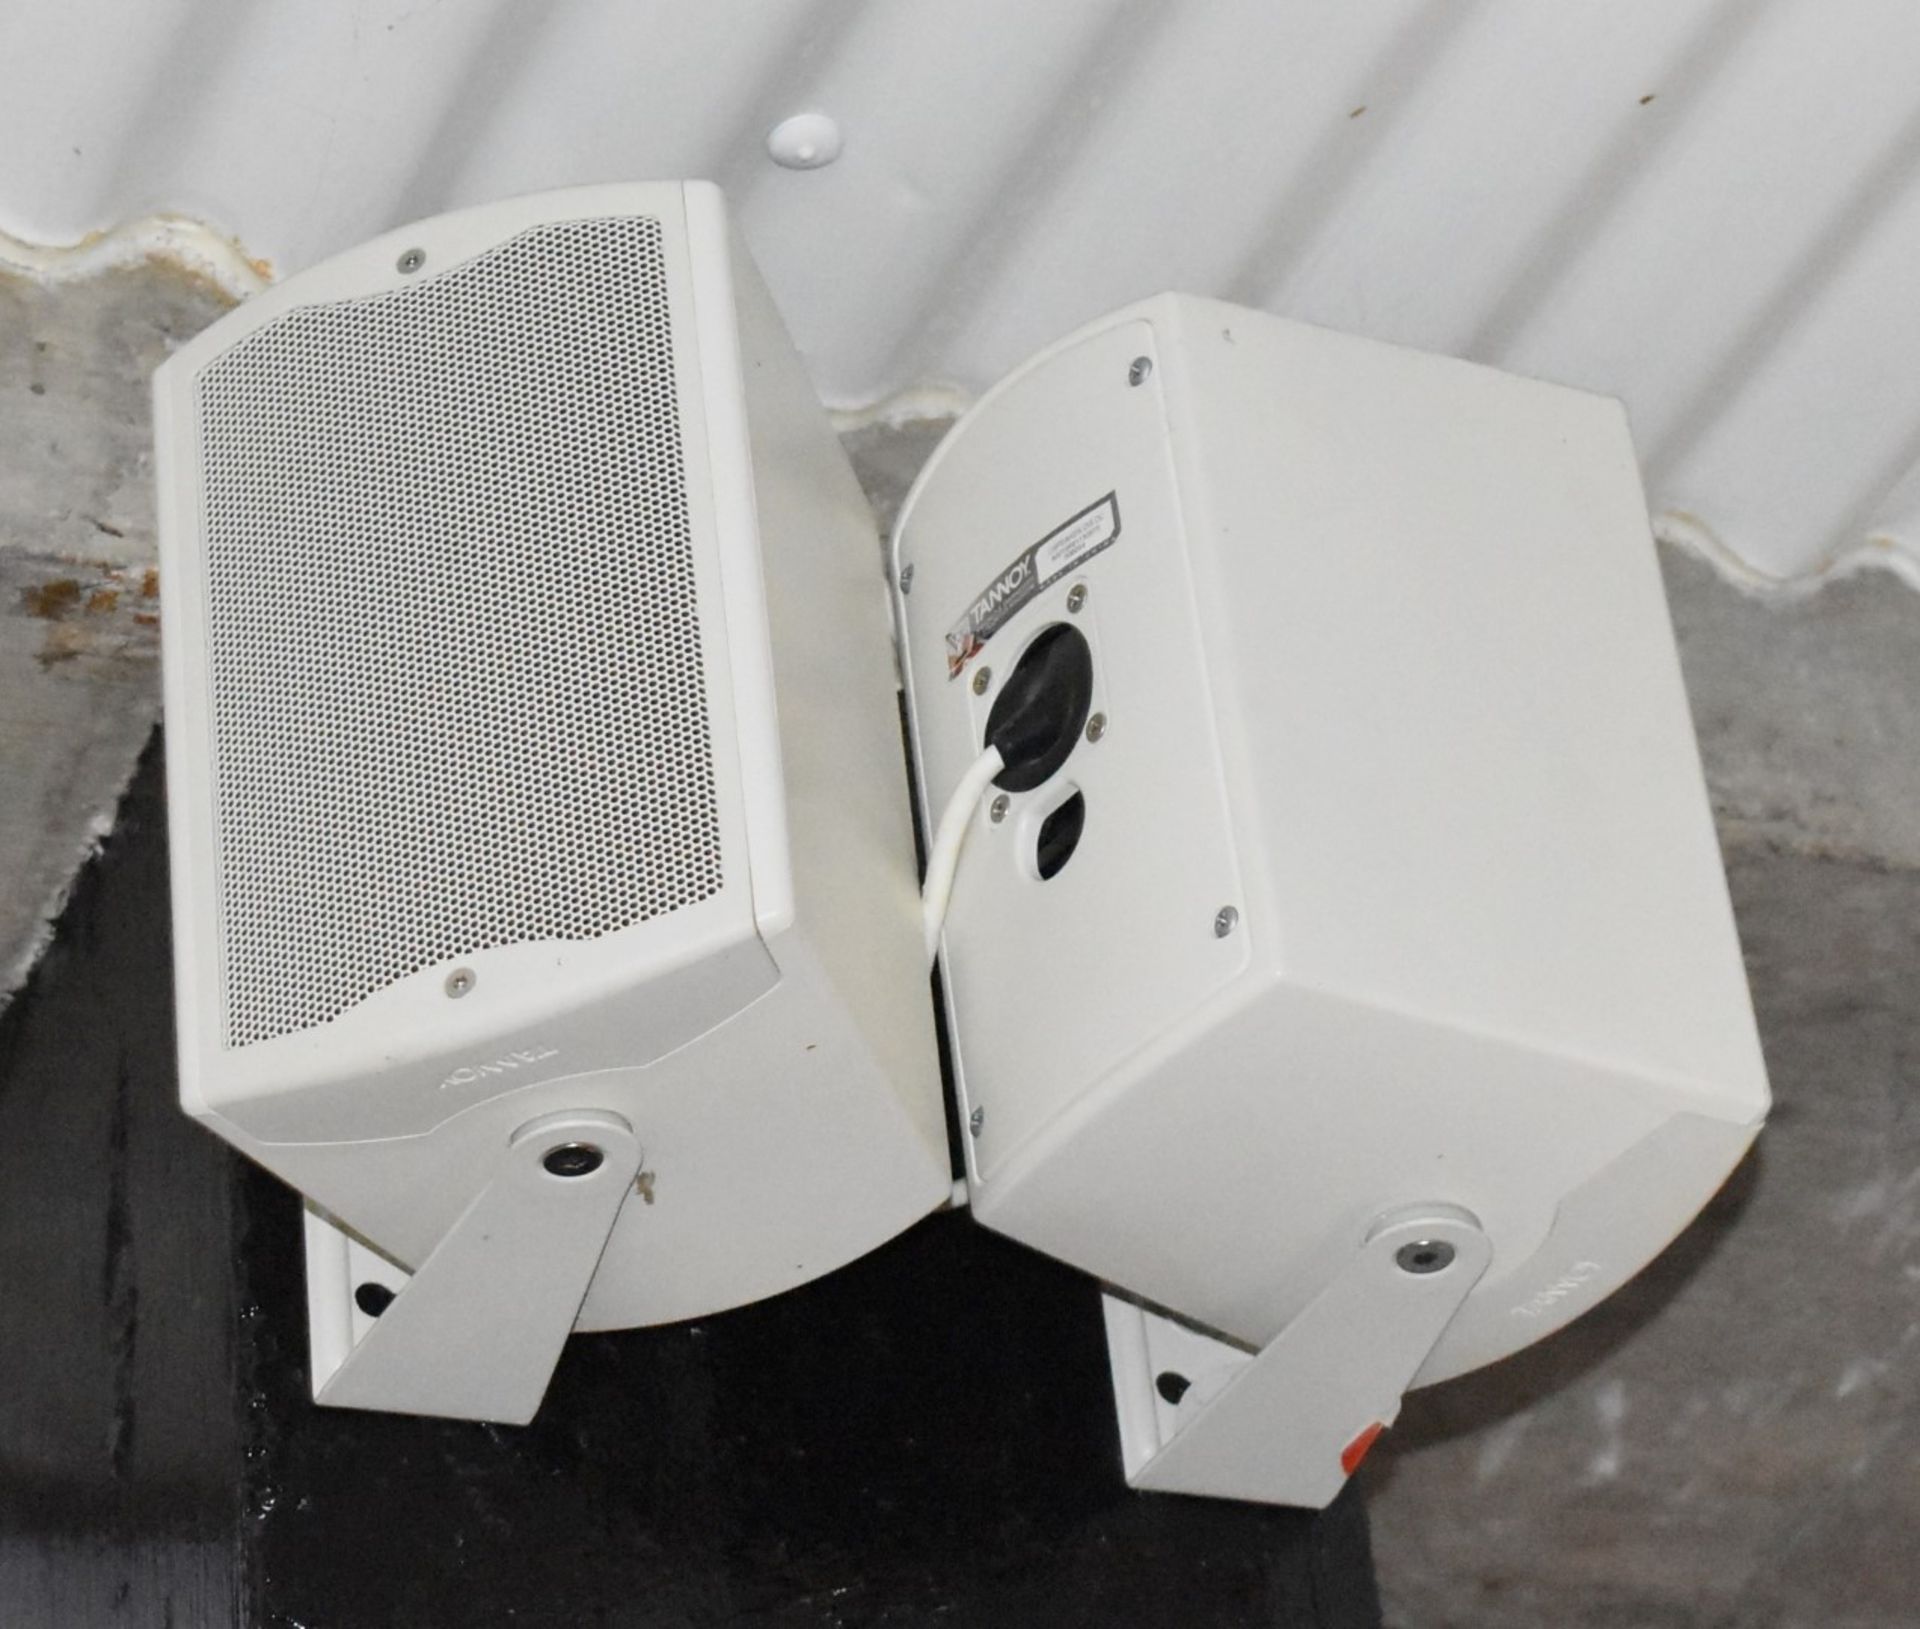 4 x Tannoy Di5 100w Loudspeakers With Wall Brackets - Image 3 of 3